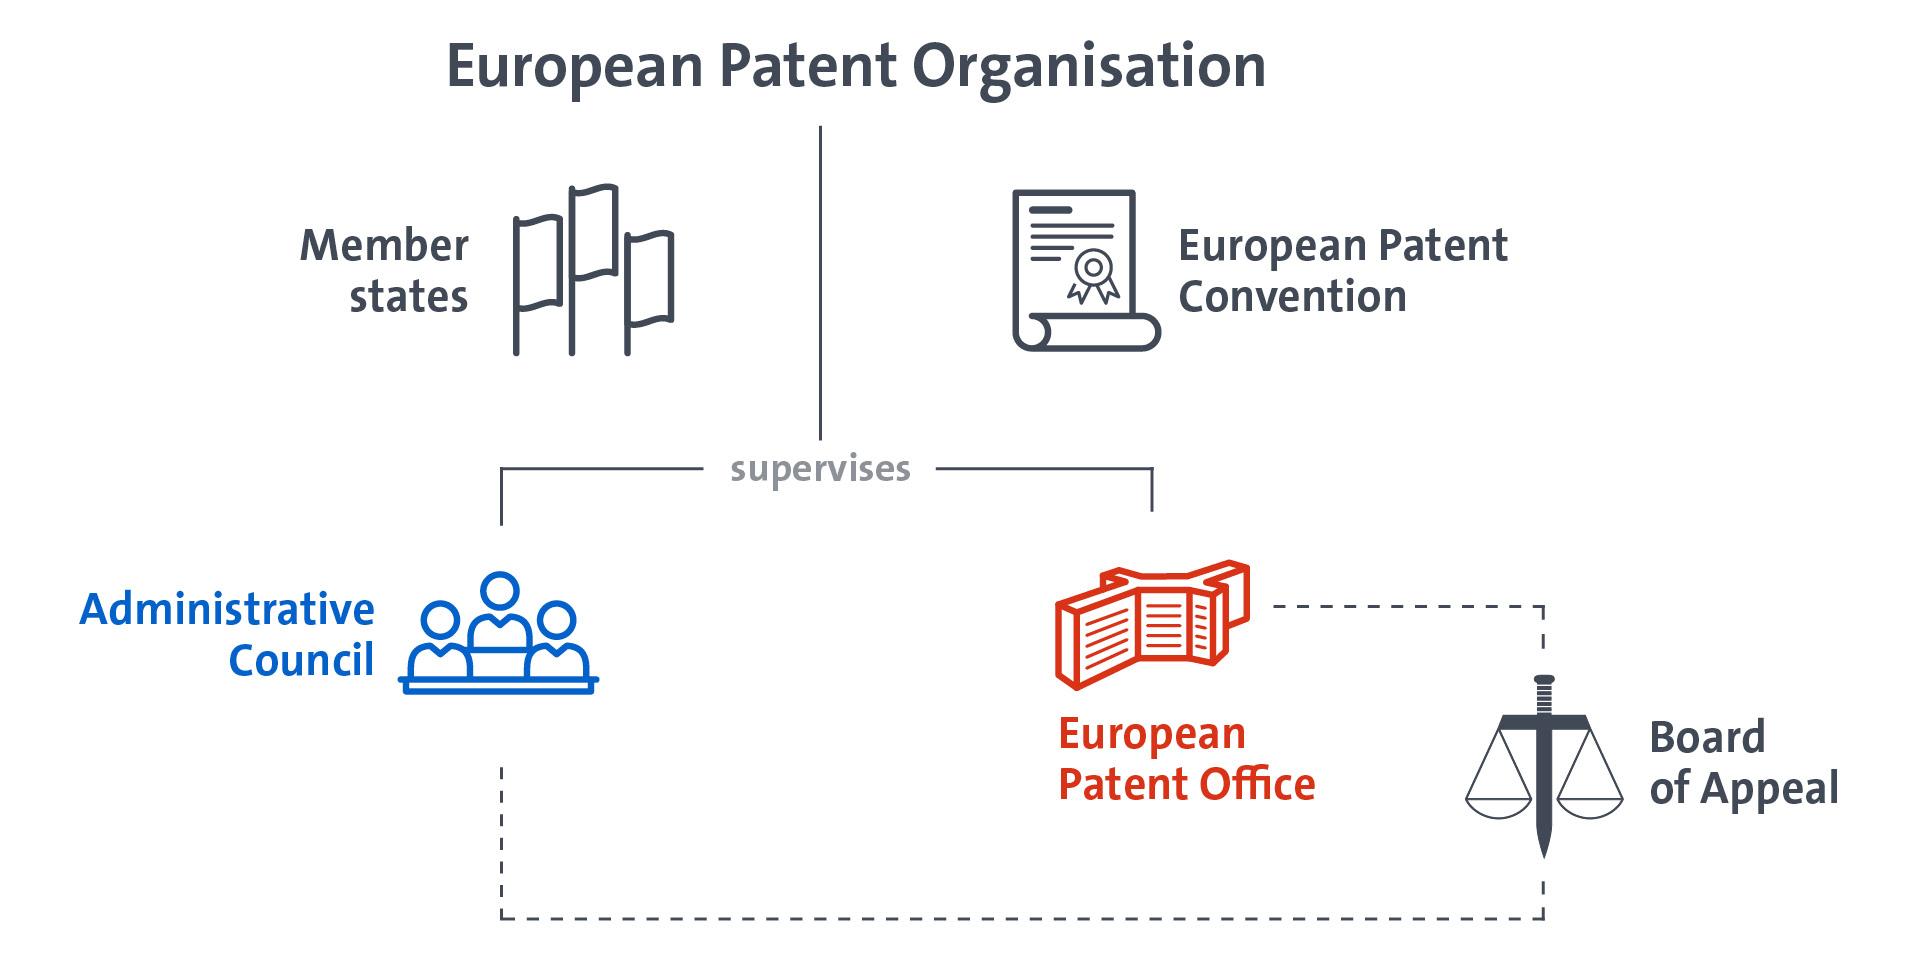 Diagram describing the structure of the European Patent Office